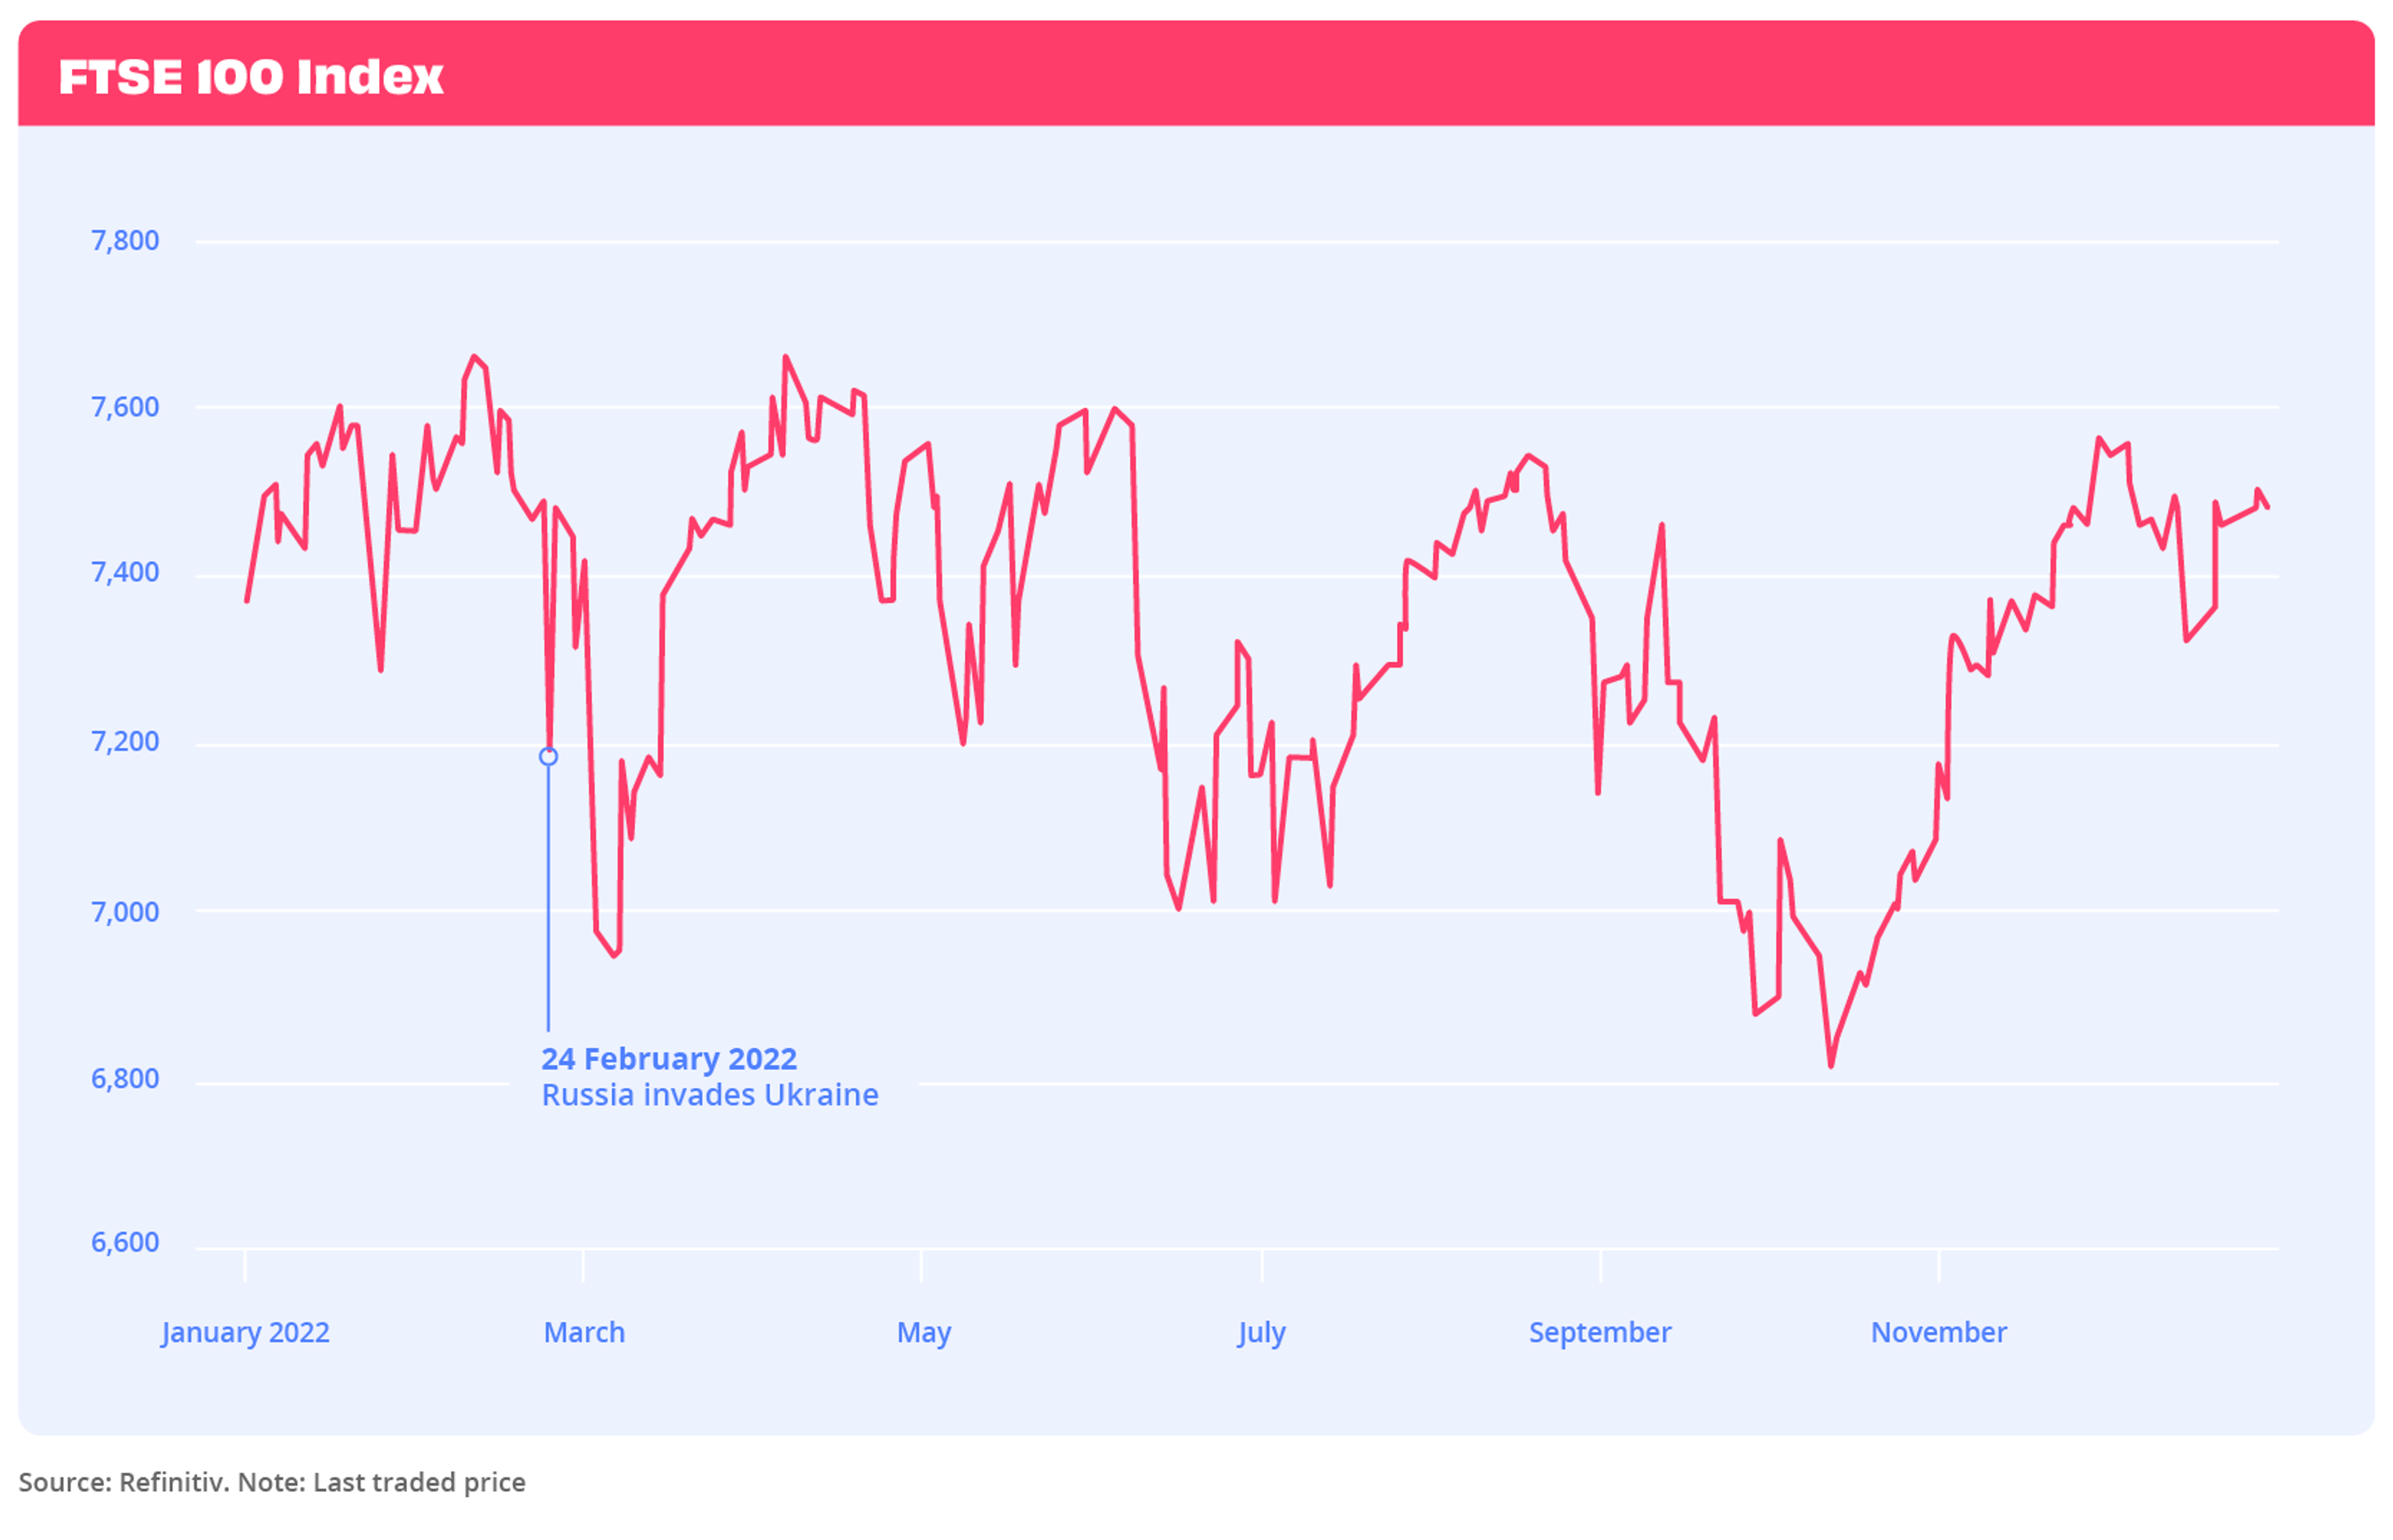 Line chart showing FTSE100 performance in December 2022